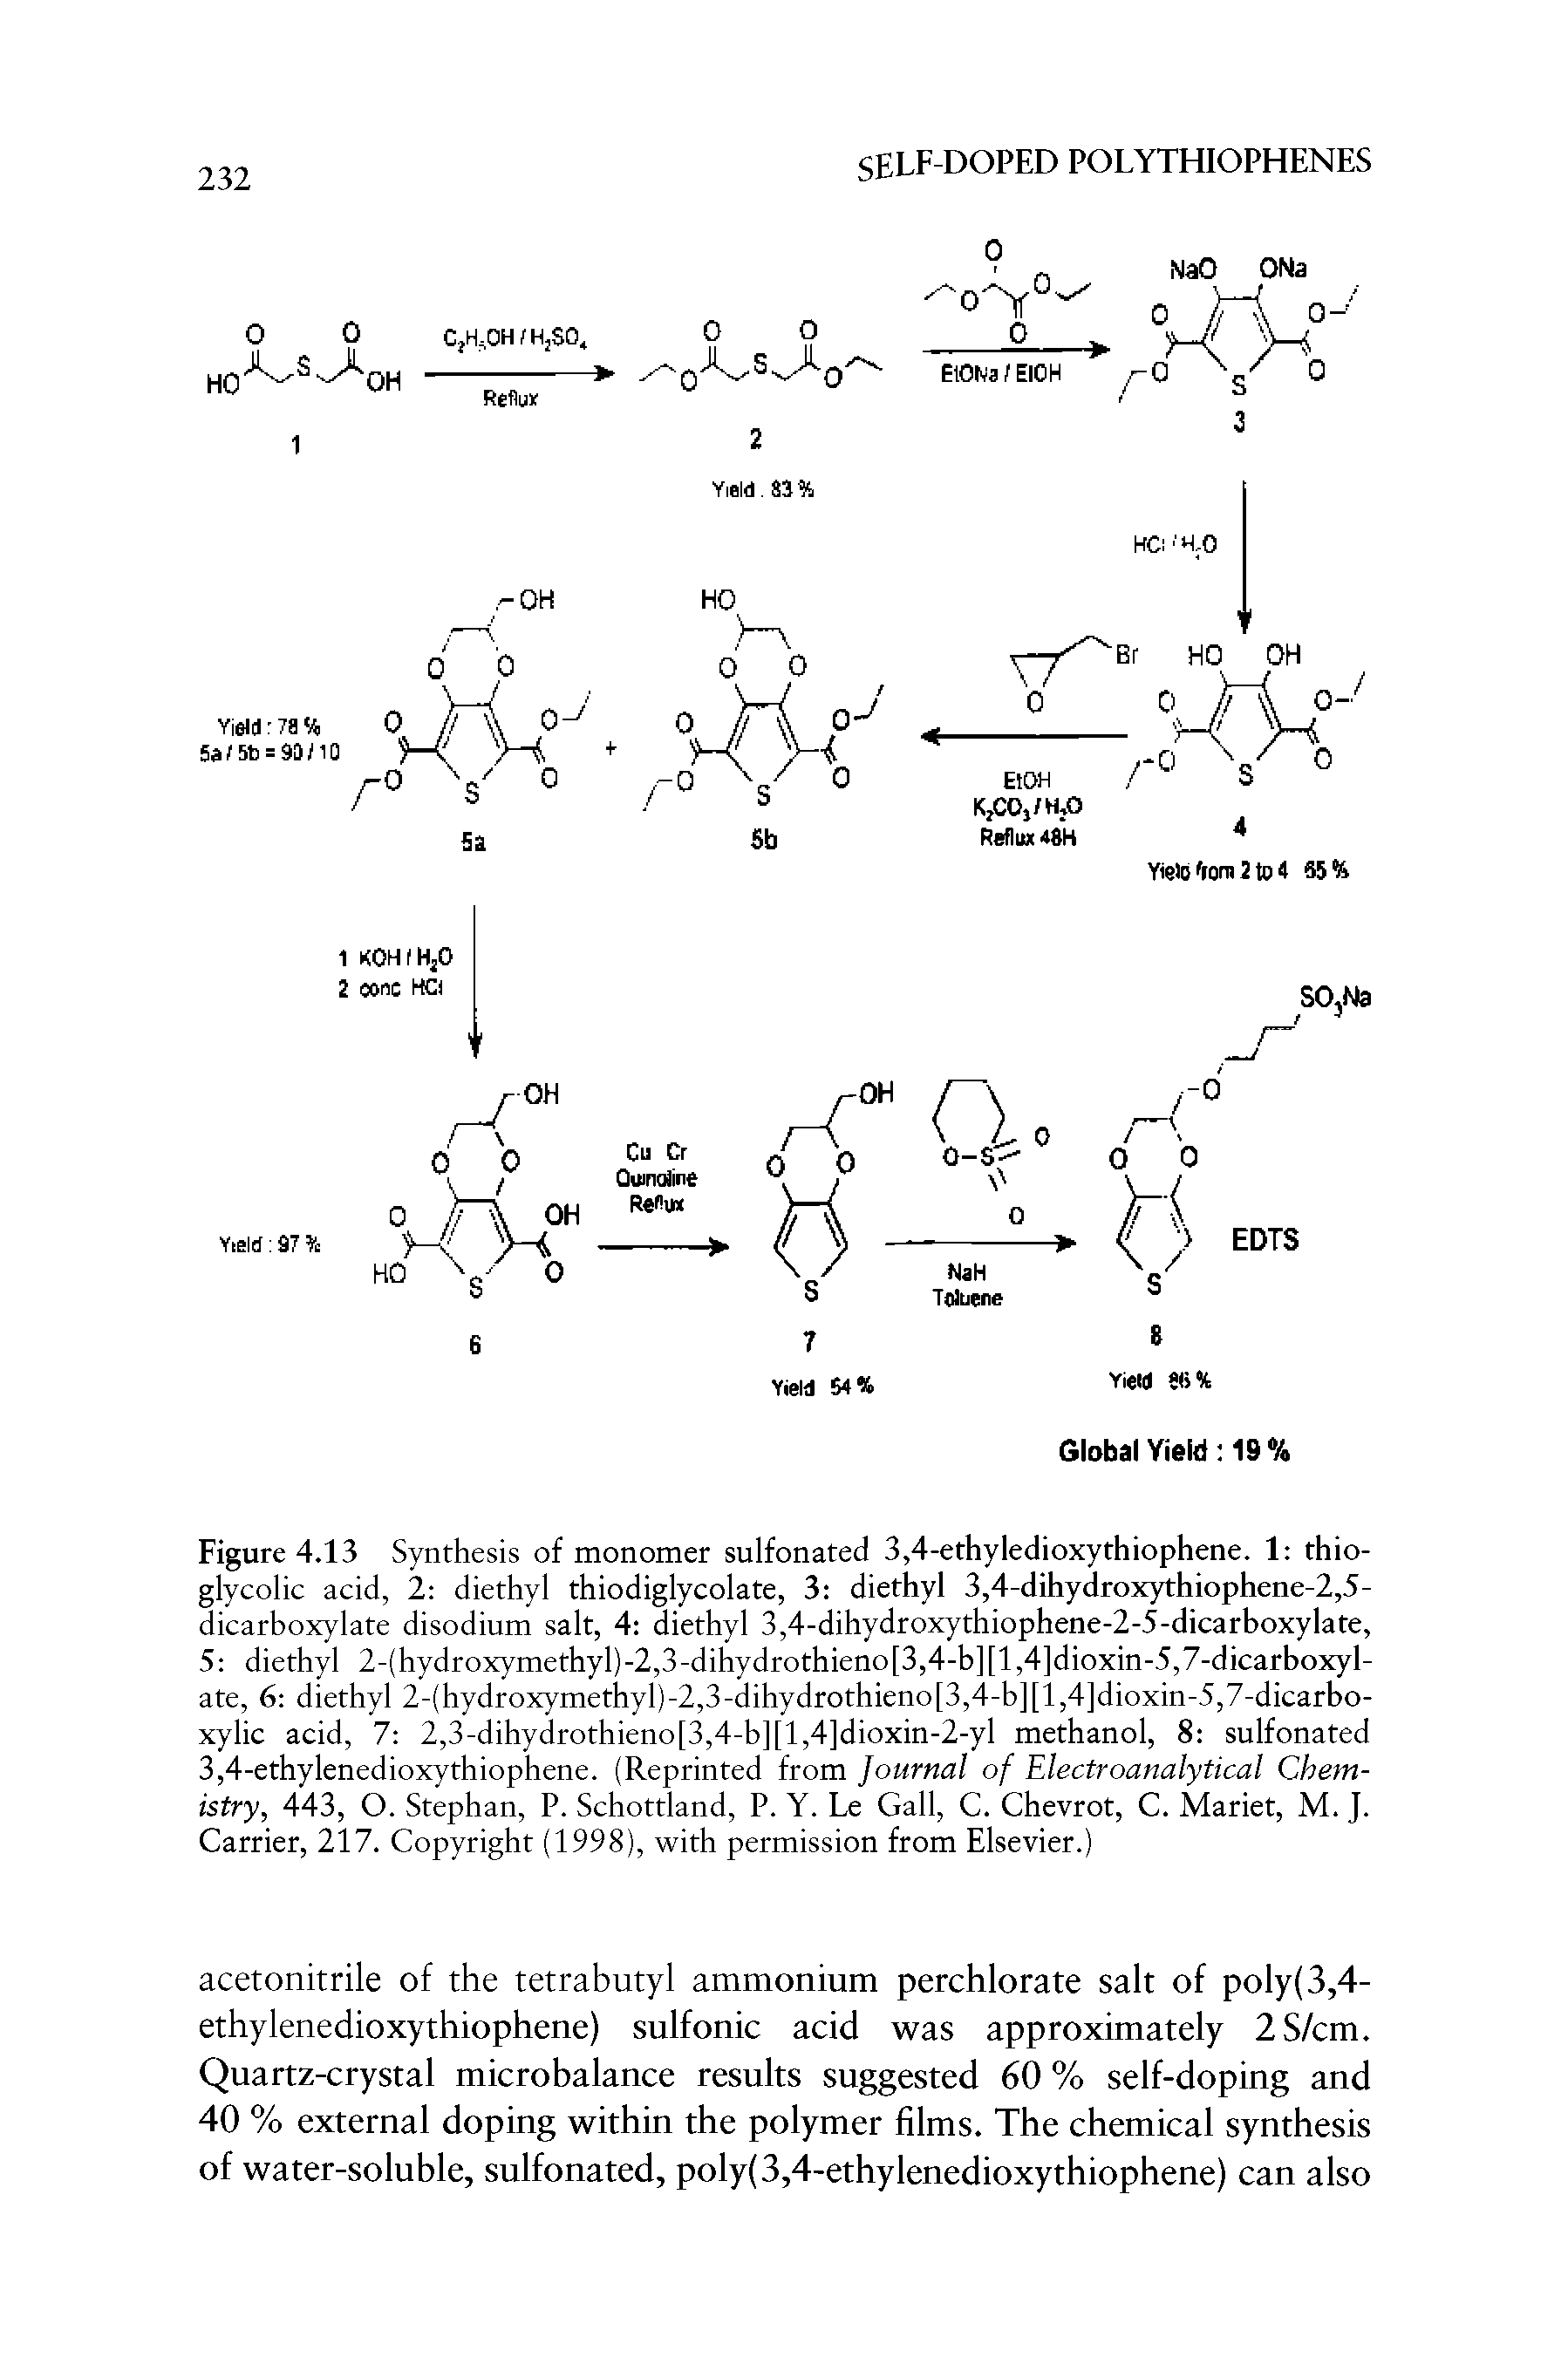 Figure 4.13 Synthesis of monomer sulfonated 3,4-ethyledioxythiophene. 1 thio-glycolic acid, 2 diethyl thiodiglycolate, 3 diethyl 3,4-dihydroxythiophene-2,5-dicarboxylate disodium salt, 4 diethyl 3,4-dihydroxythiophene-2-5-dicarboxylate, 5 diethyl 2-(hydroxymethyl)-2,3-dihydrothieno[3,4-b][l,4]dioxin-5,7-dicarboxyl-ate, 6 diethyl 2-(hydroxymethyl)-2,3-dihydrothieno[3,4-b][l,4]dioxin-5,7-dicarbo-xylic acid, 7 2,3-dihydrothieno[3,4-b][l,4]dioxin-2-yl methanol, 8 sulfonated 3,4-ethylenedioxythiophene. (Reprinted from journal of Electroanalytical Chemistry, 443, O. Stephan, P. Schottland, P. Y. Le Gall, C. Chevrot, C. Mariet, M. J. Carrier, 217. Copyright (1998), with permission from Elsevier.)...